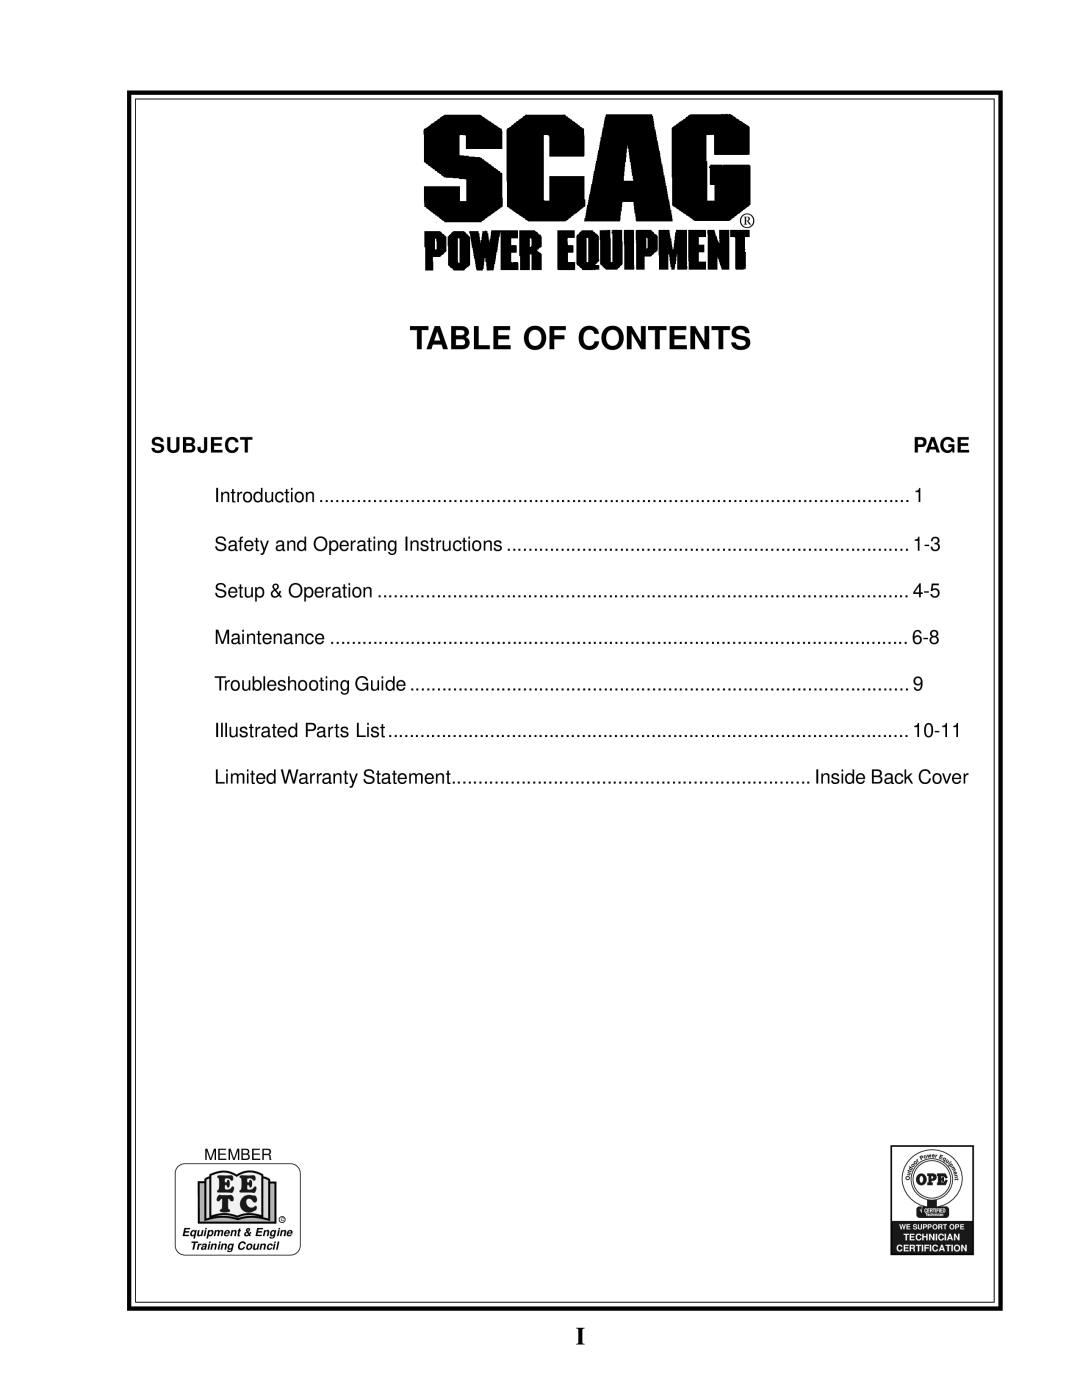 Scag Power Equipment SE-3.5BS manual Table Of Contents, Subject, Page, 10-11, Limited Warranty Statement, Inside Back Cover 